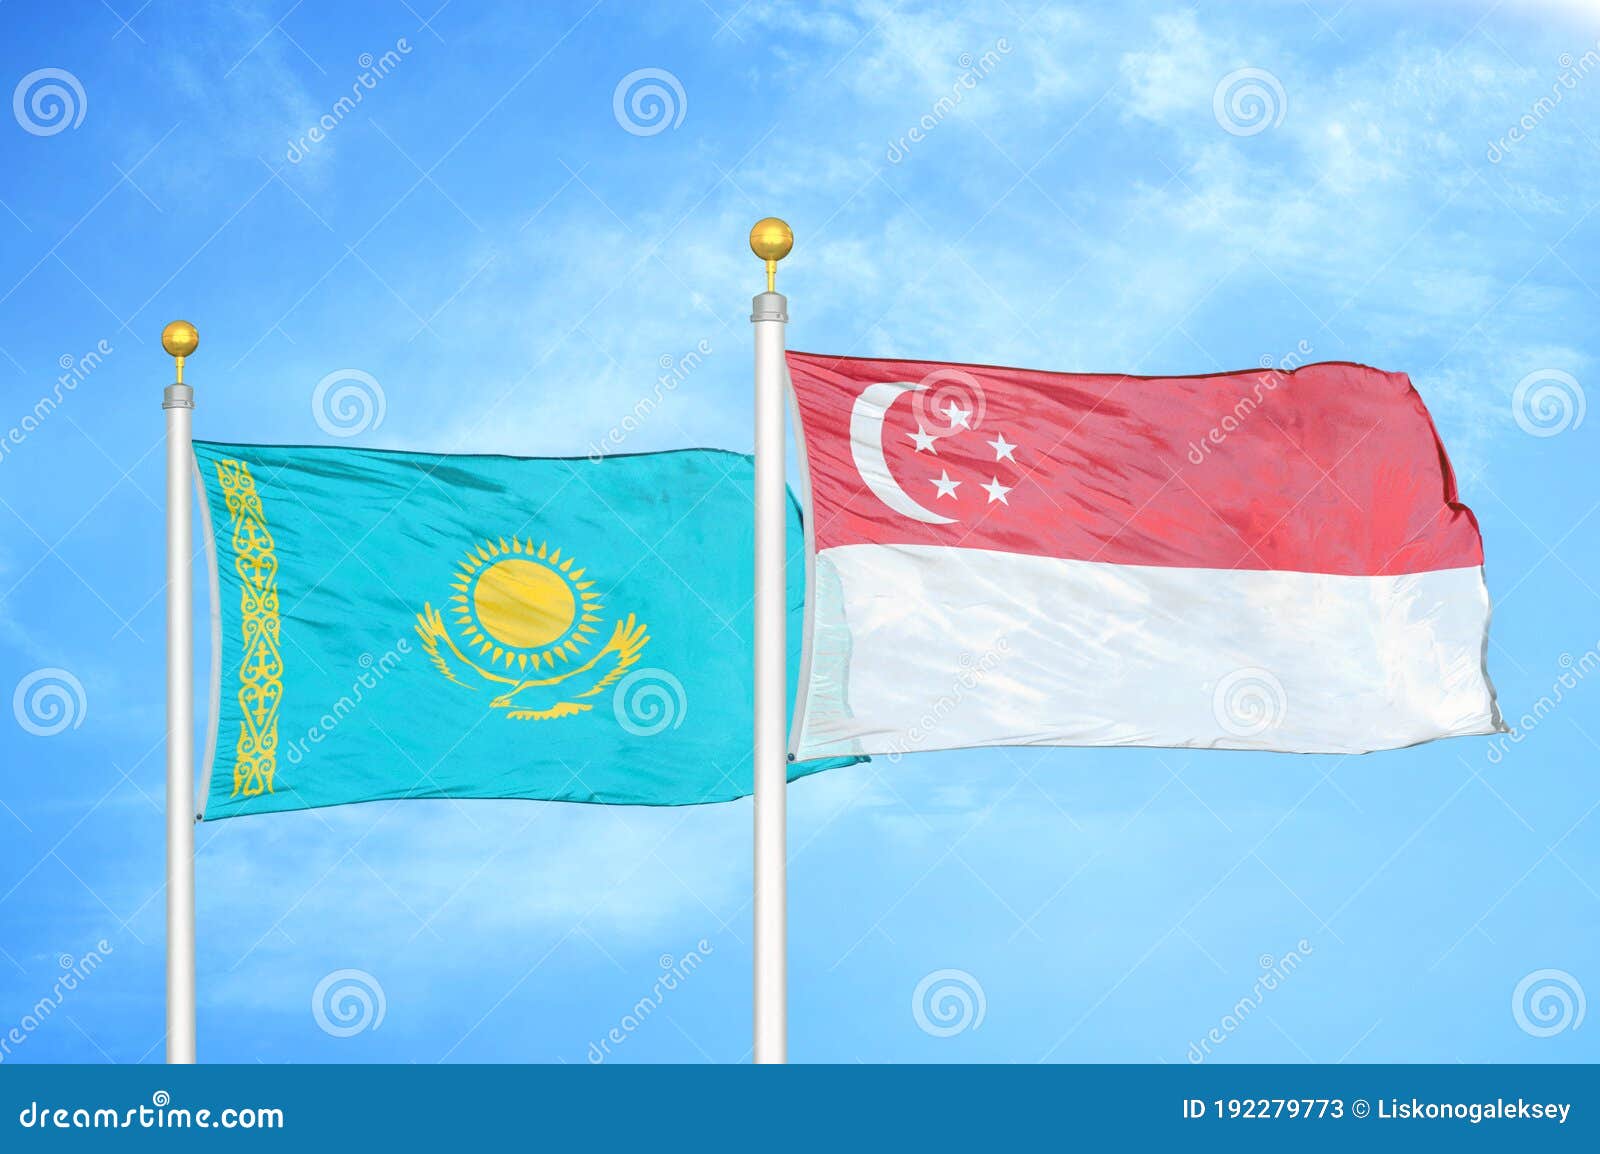 kazakhstan and singapore two flags on flagpoles and blue sky